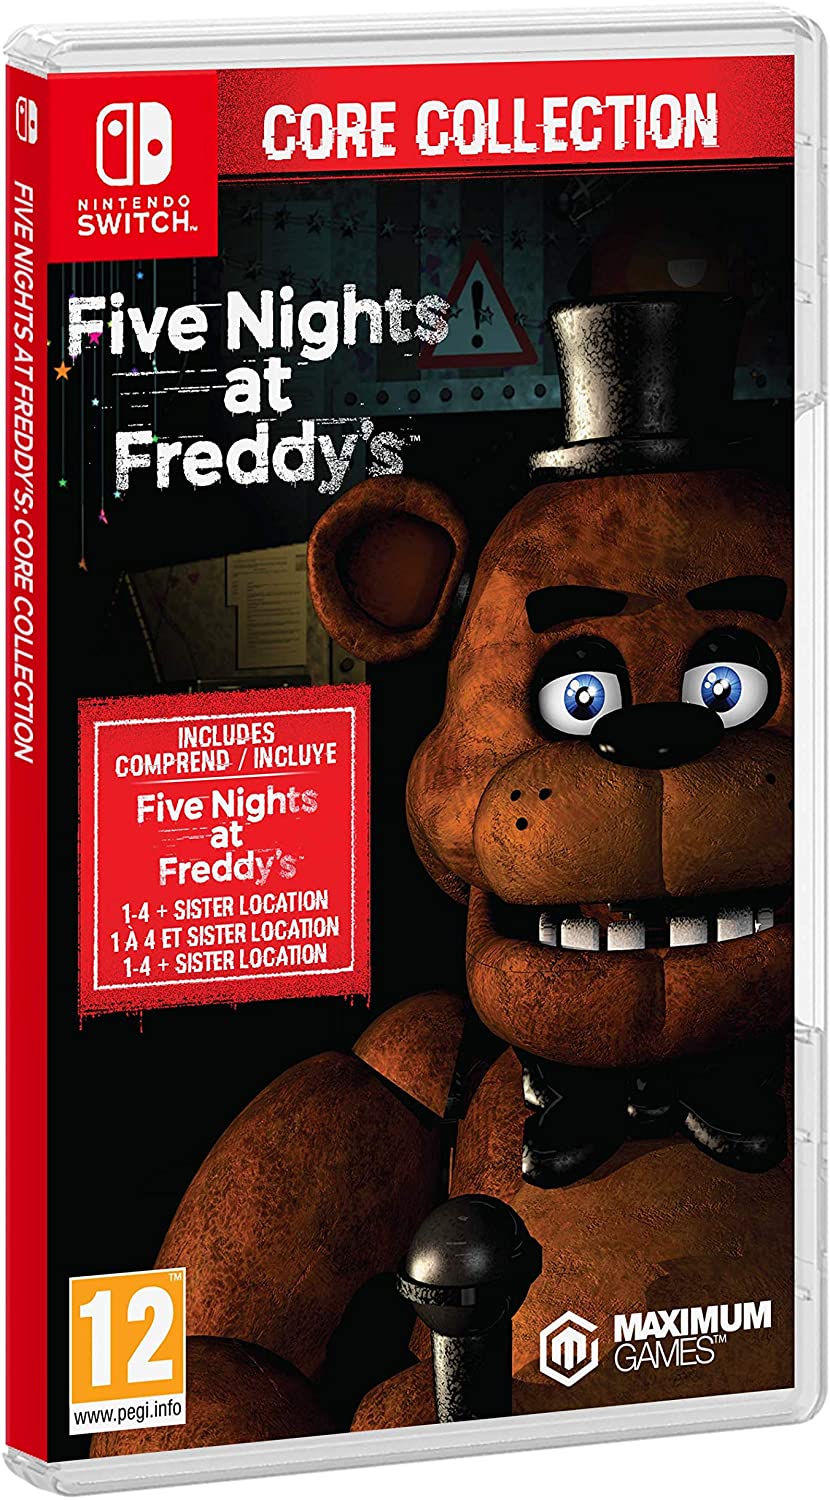 Five Nights at Freddy's - Core Collection [Nintendo Switch, русская версия]